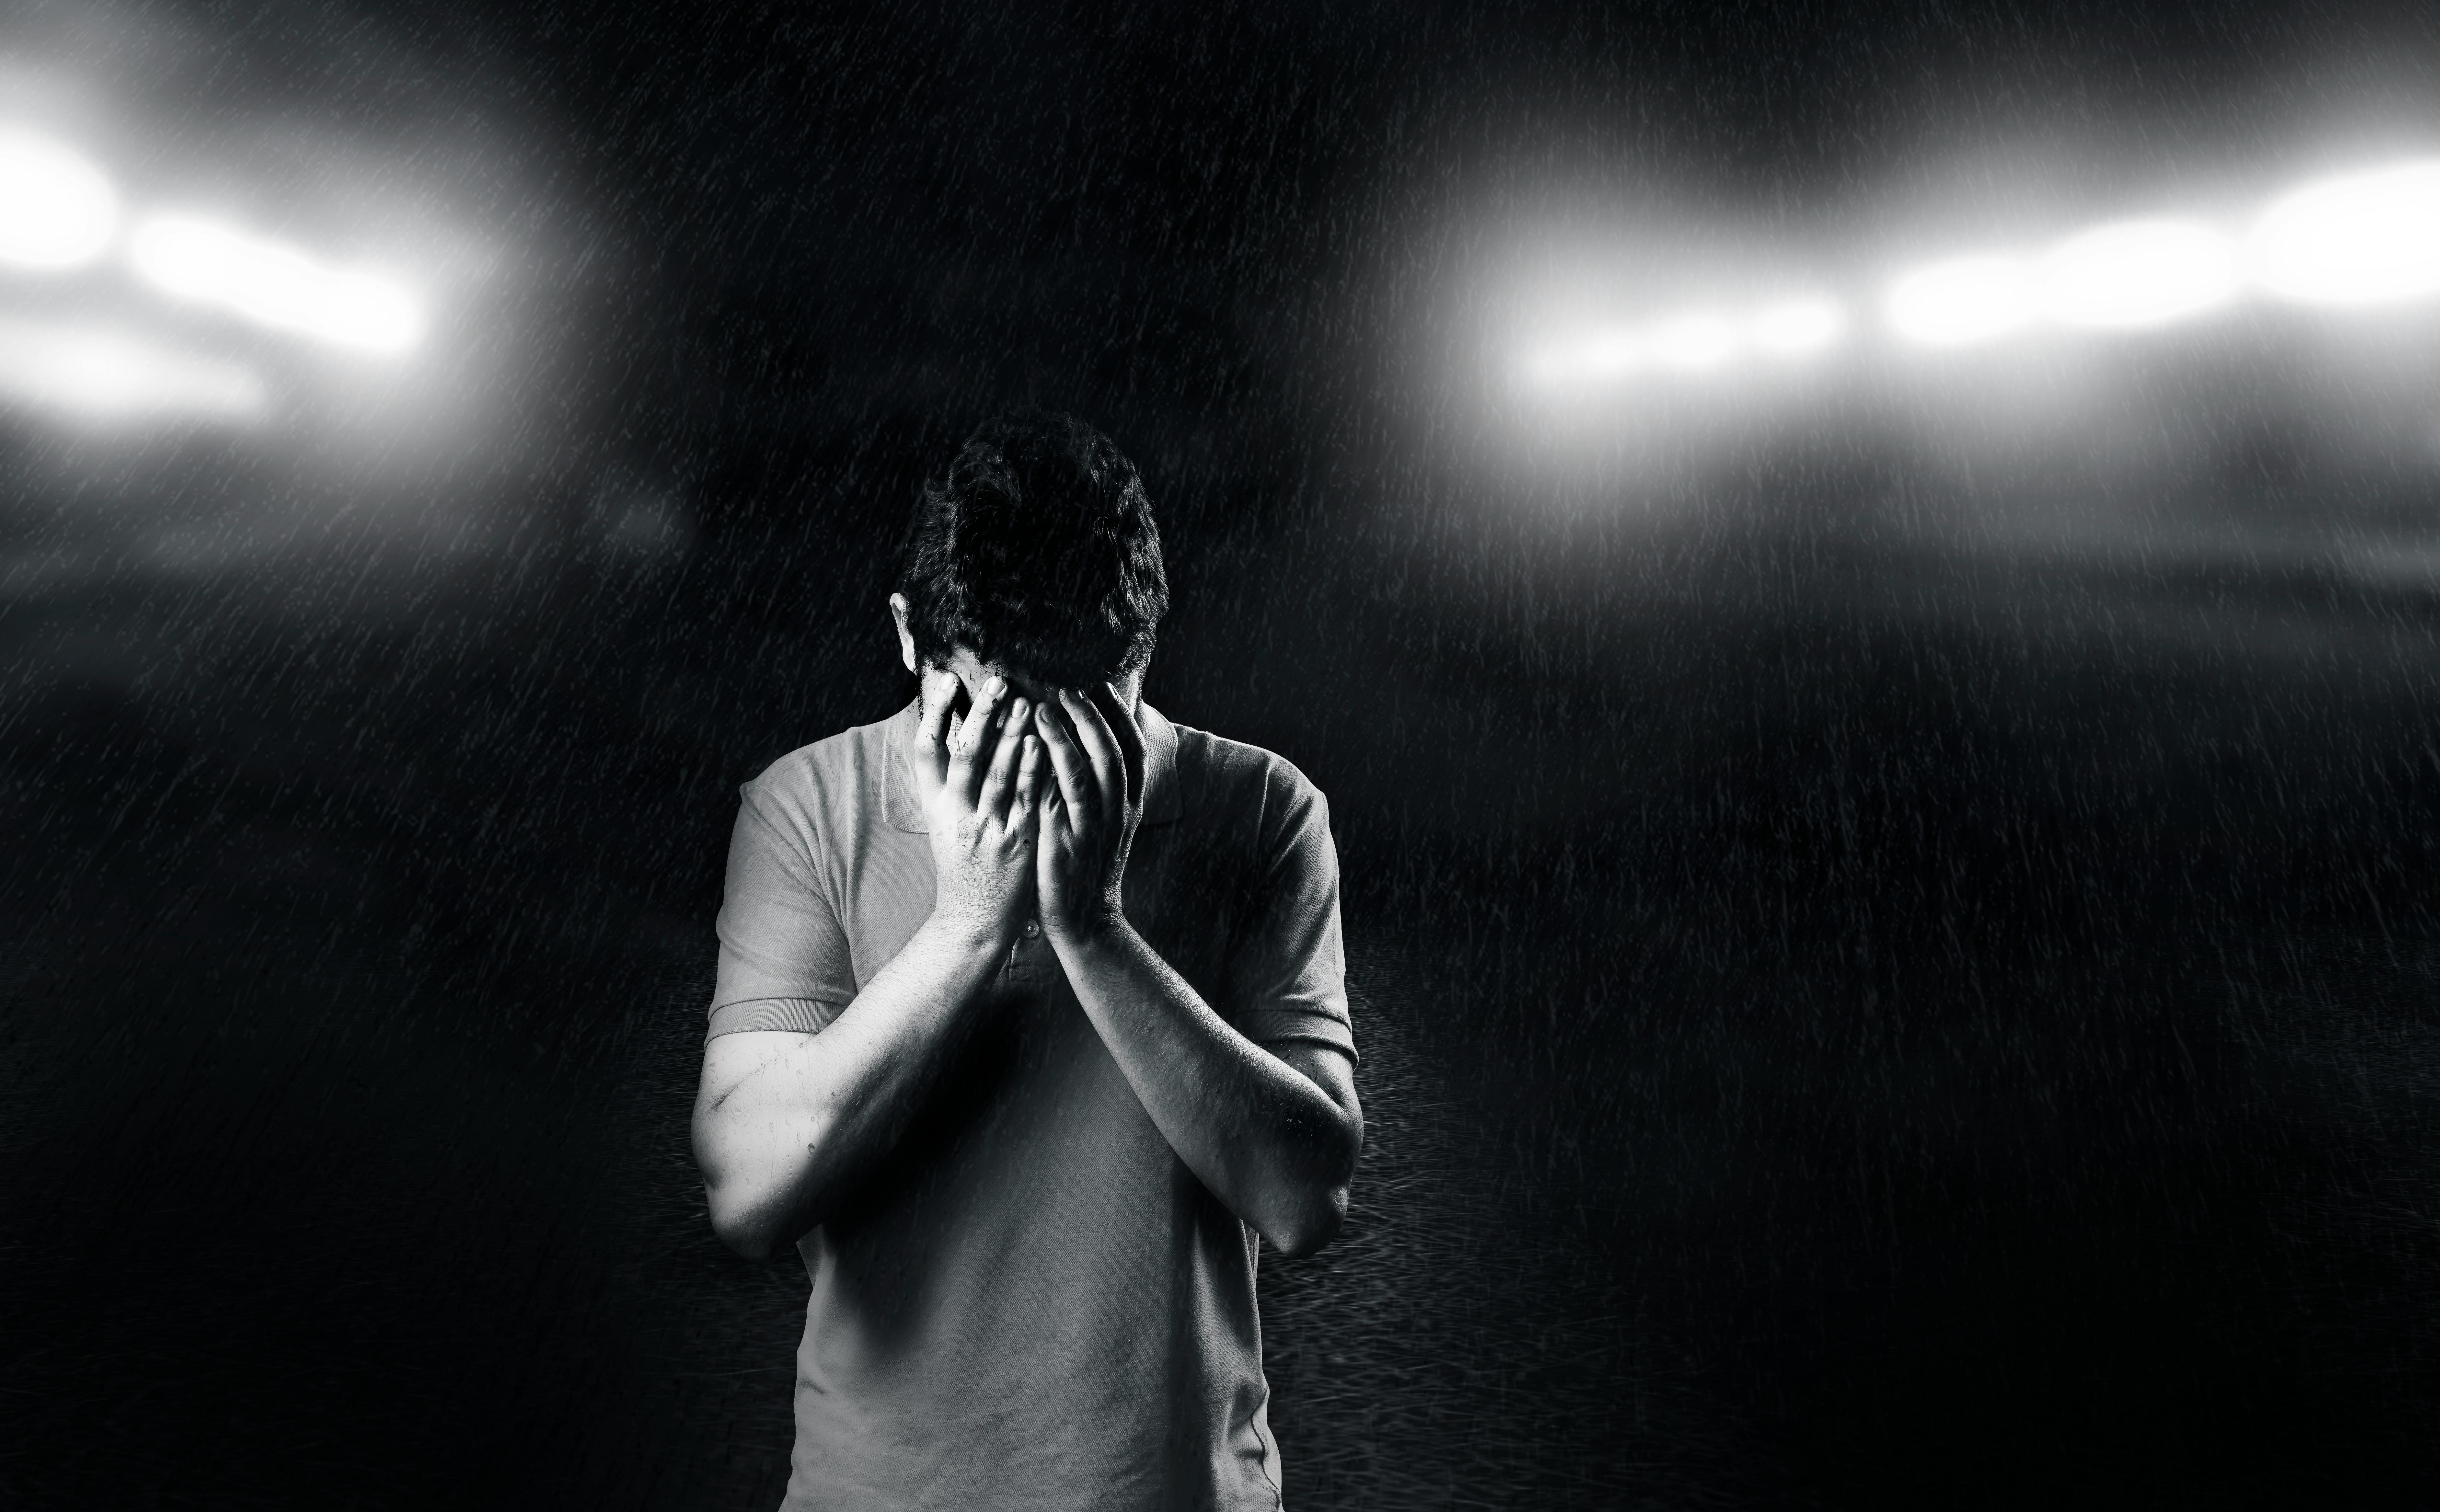 Monochrome Photo of Man Covering His Face | Source: Pexels